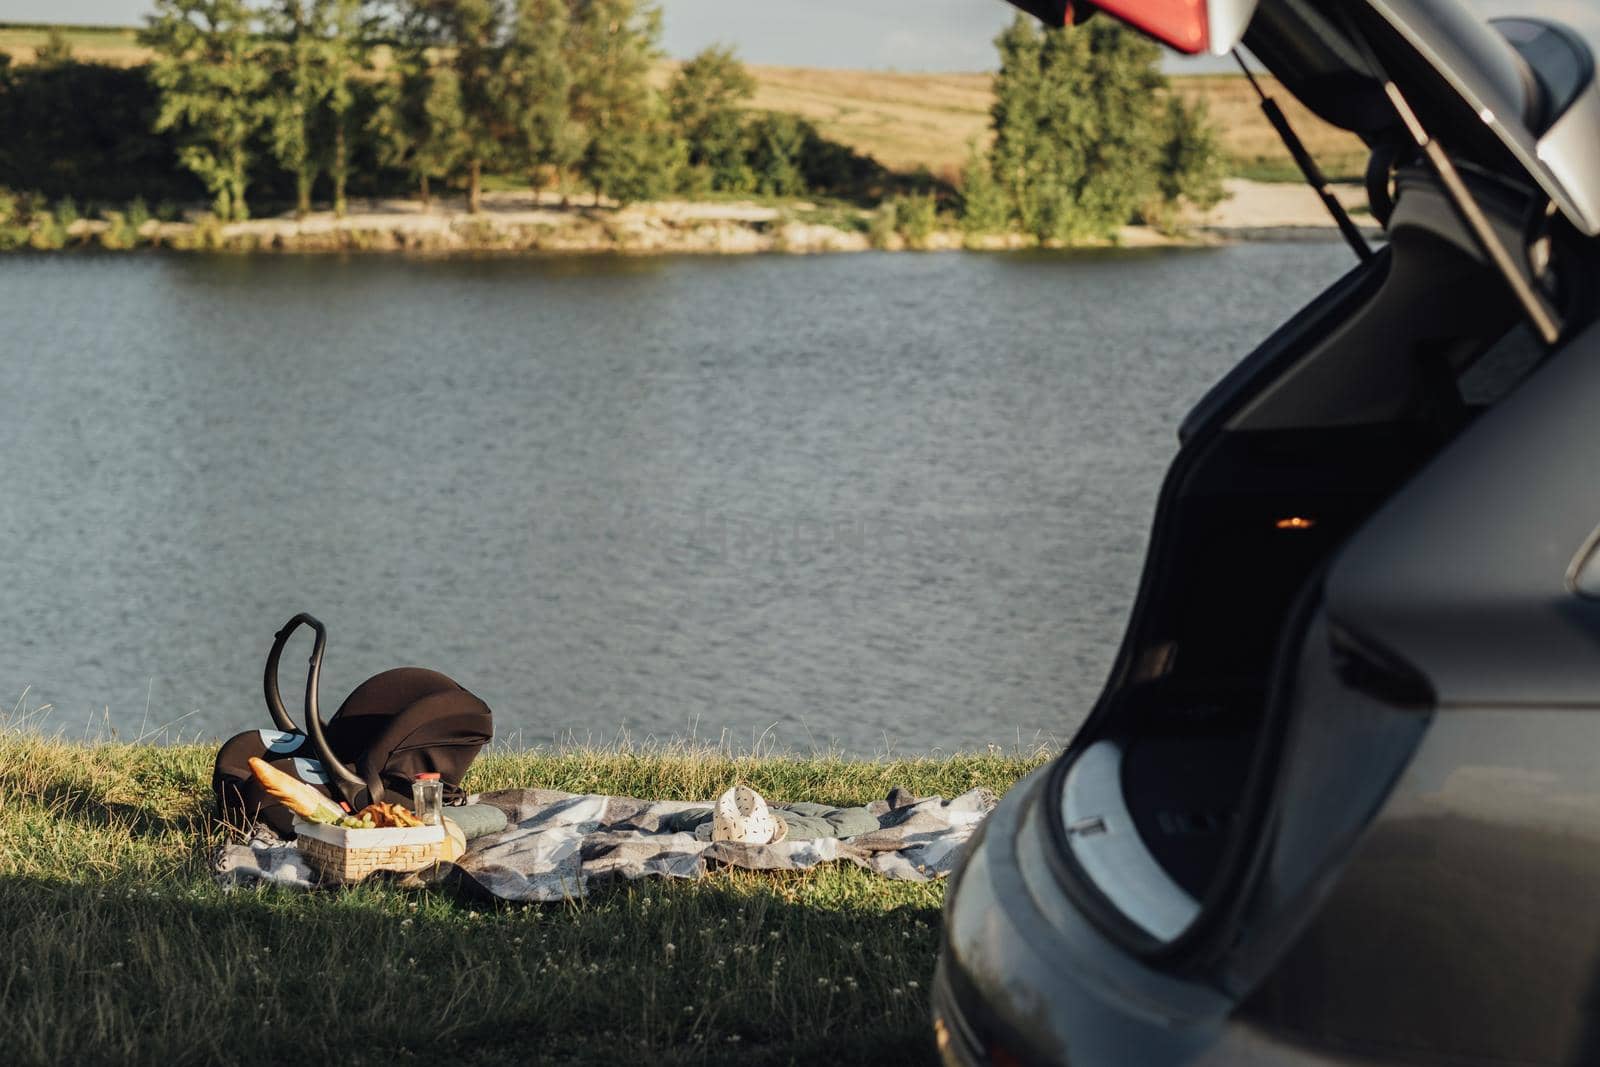 Picnic Set Outdoors by Lake at Sunset, Child Car Seat, Road Trip Concept